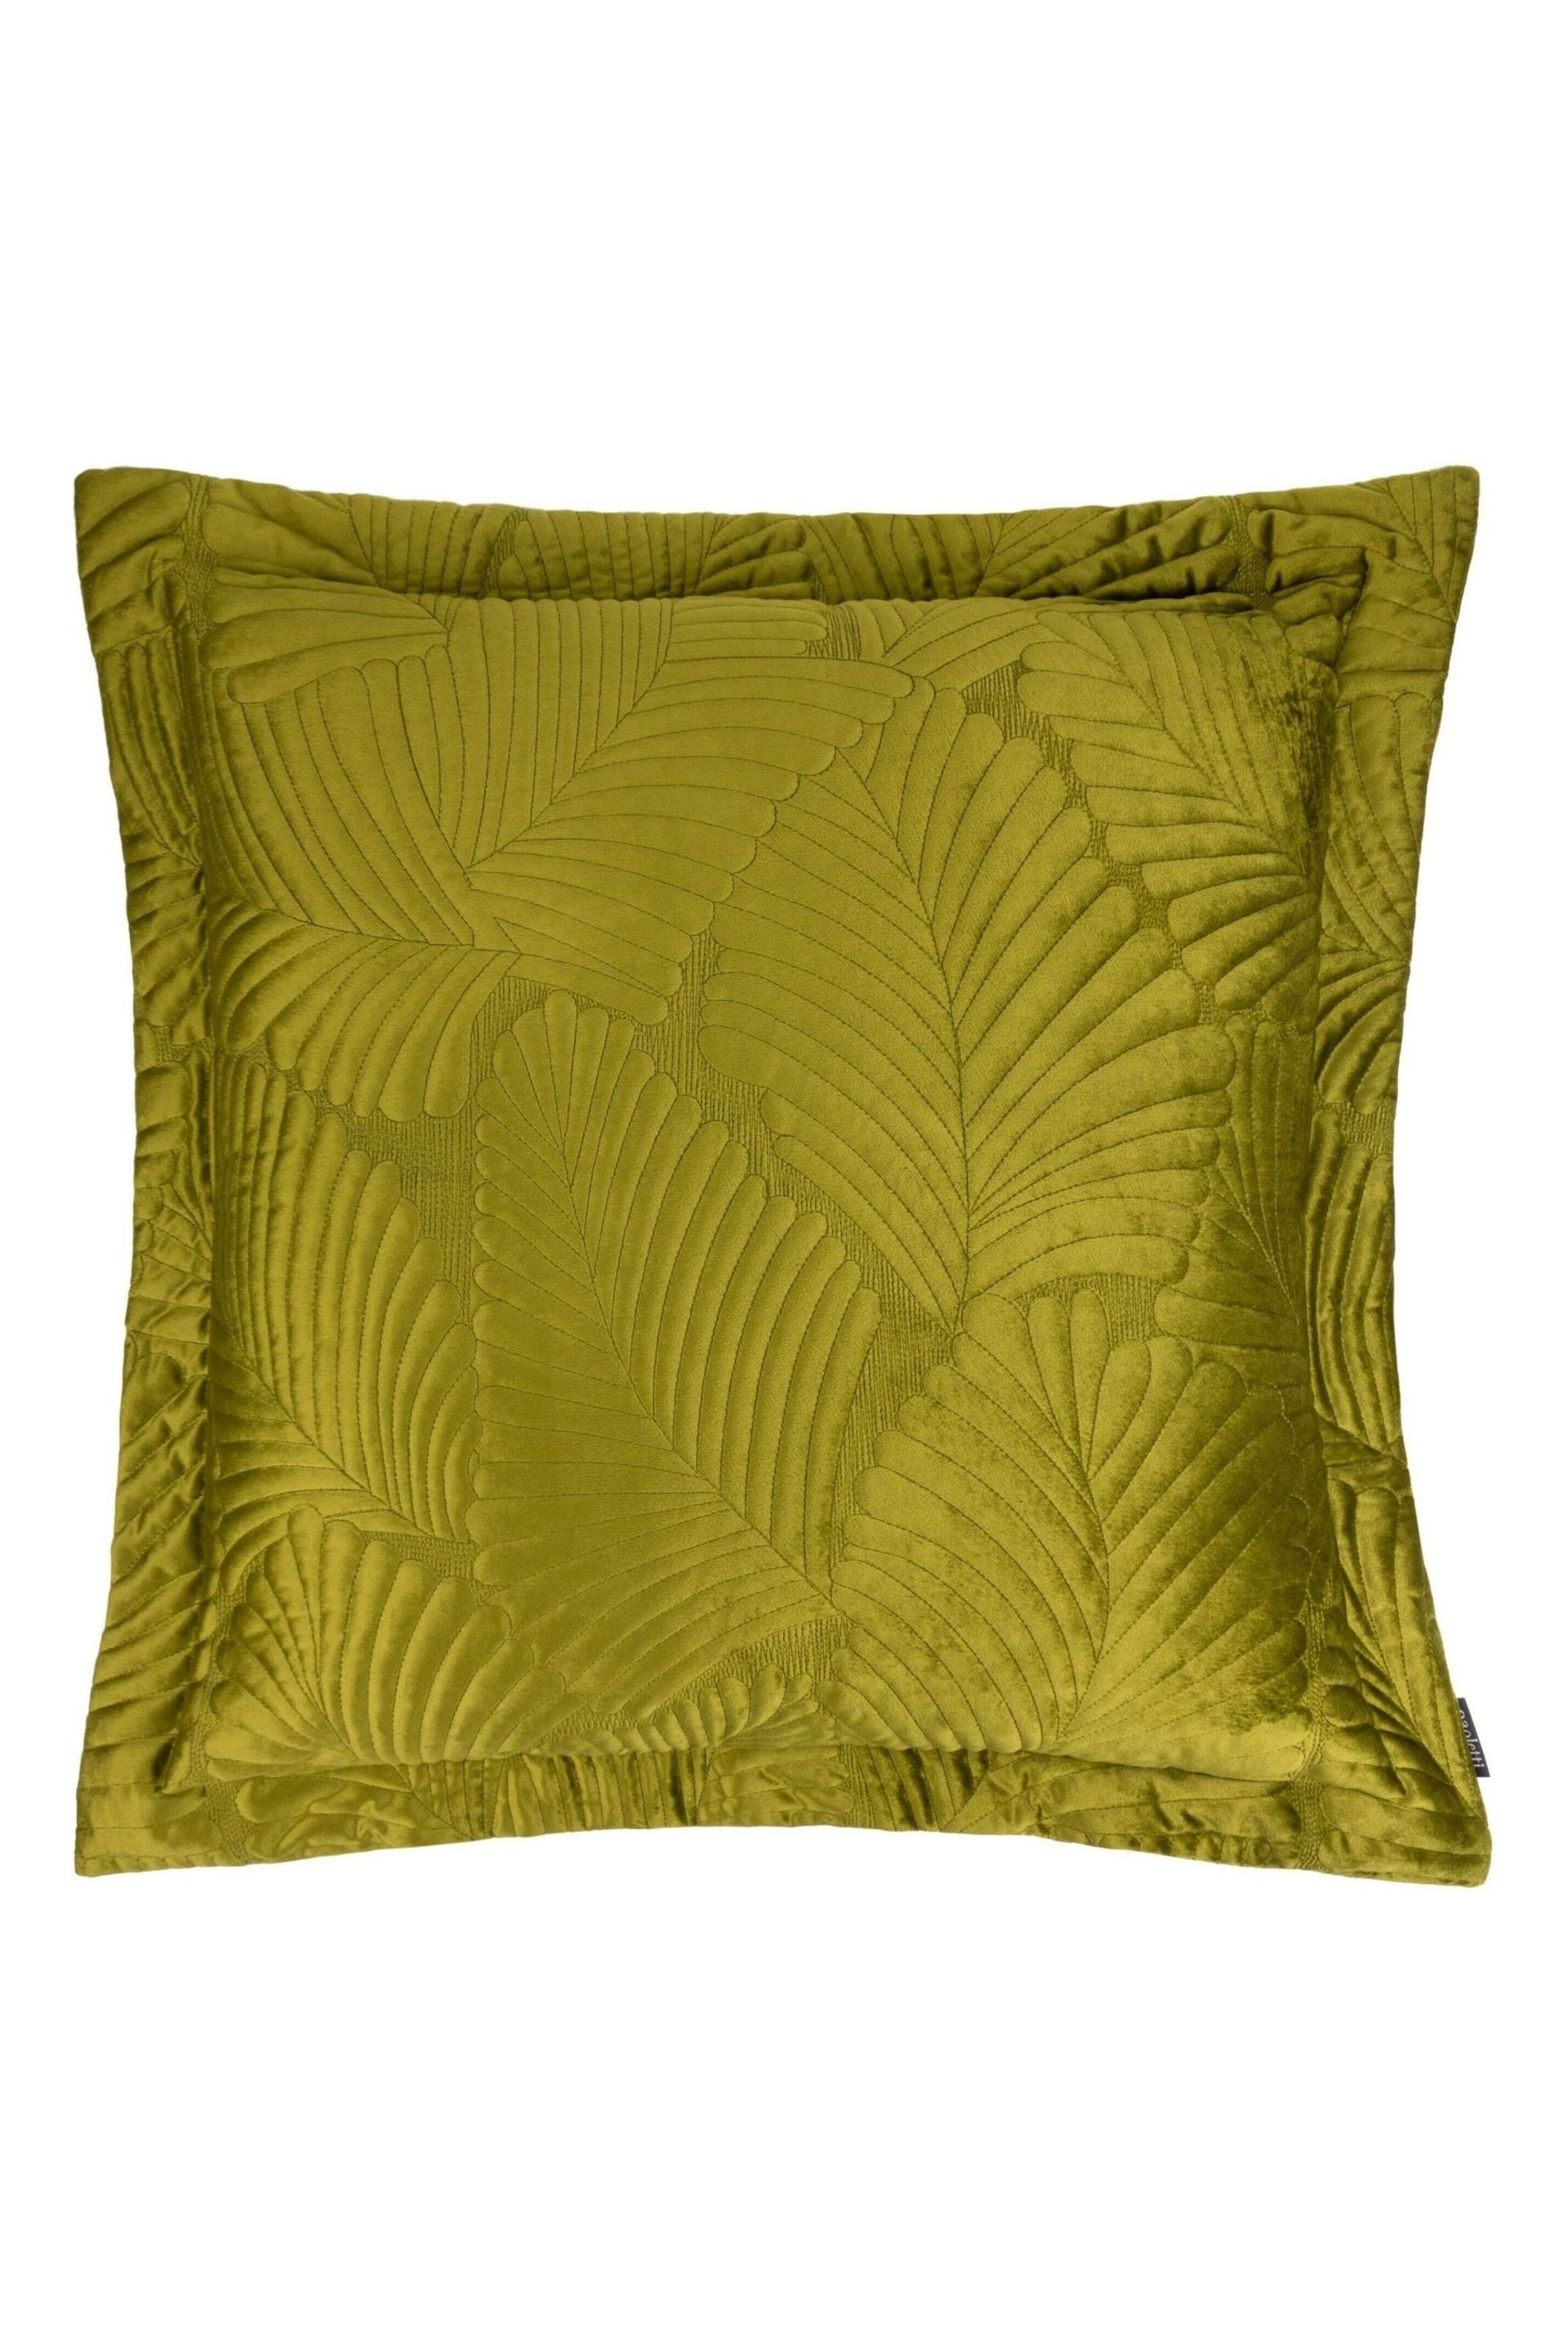 Paoletti Green Palmeria Quilted Velvet Feather Filled Cushion - Image 2 of 4